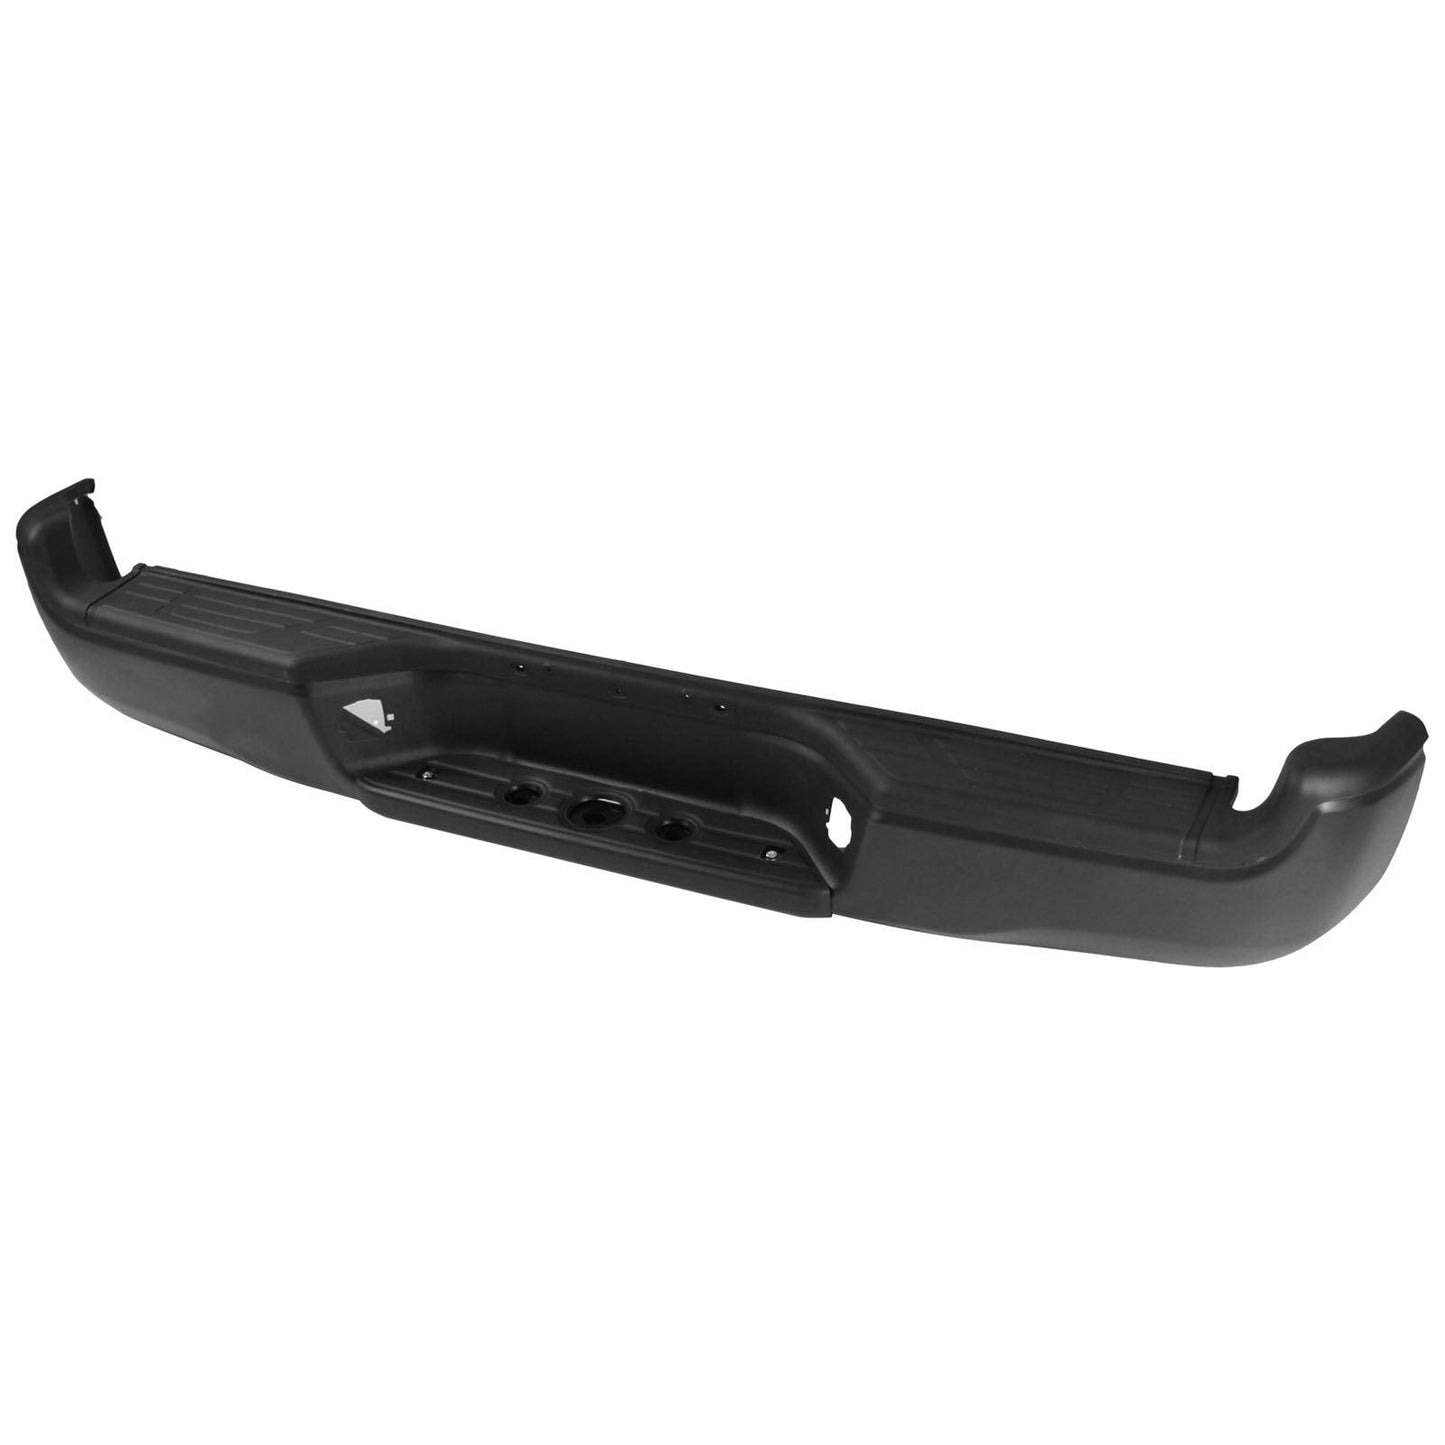 NEW Primered - Complete Rear Steel Step Bumper for 2005-2015 Toyota Tacoma 05-15 (Fits: Tacoma) TO1103114 - Goodmatchup